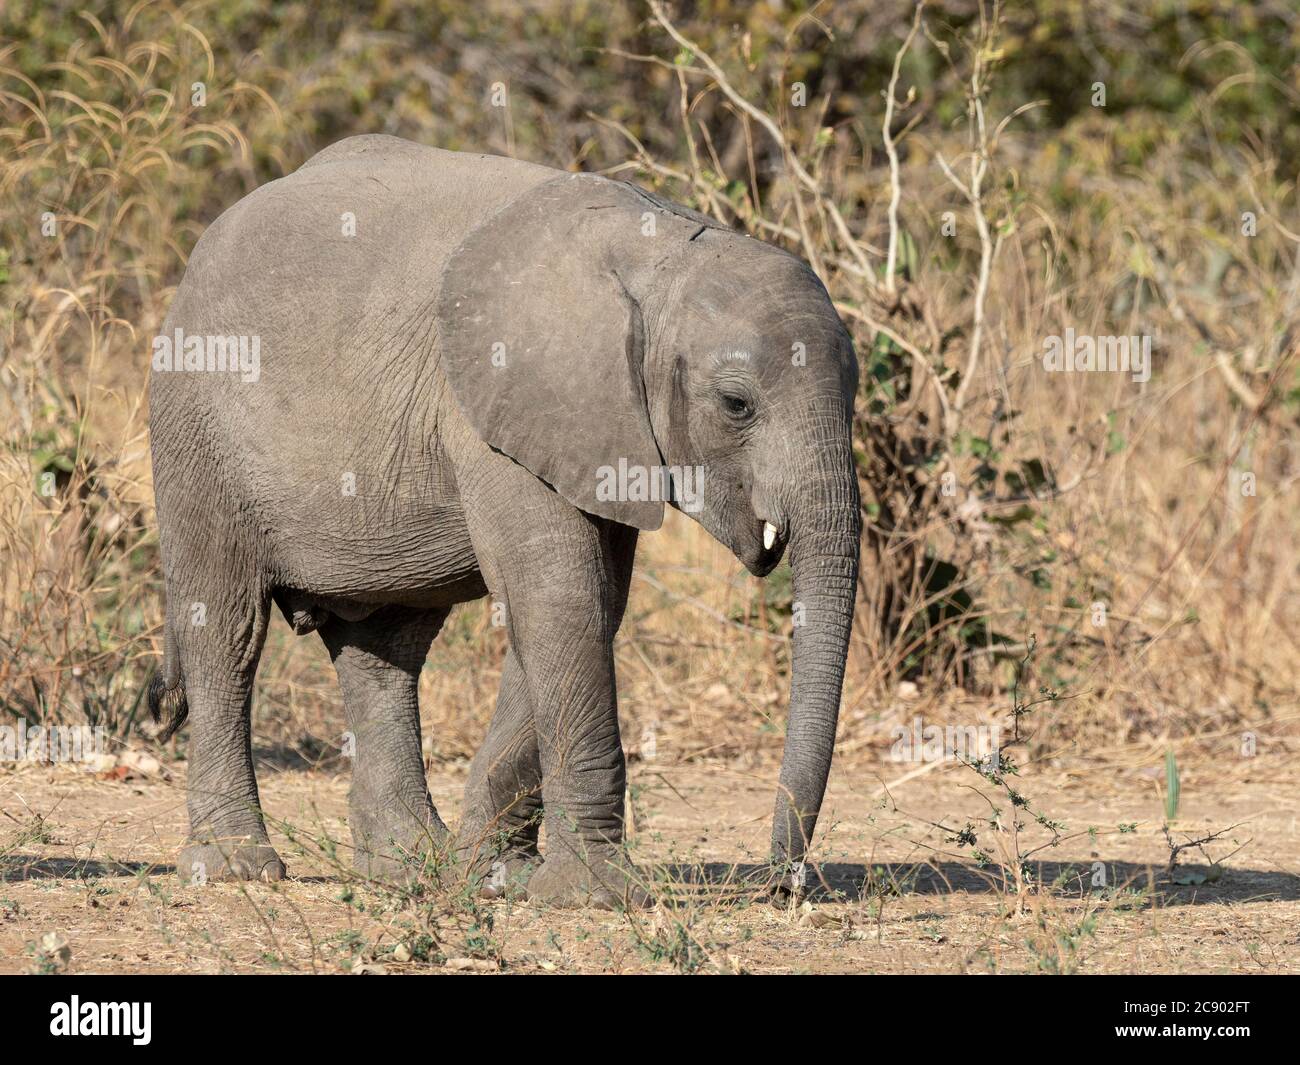 A young African bush elephant, Loxodonta africana, in South Luangwa National Park, Zambia. Stock Photo